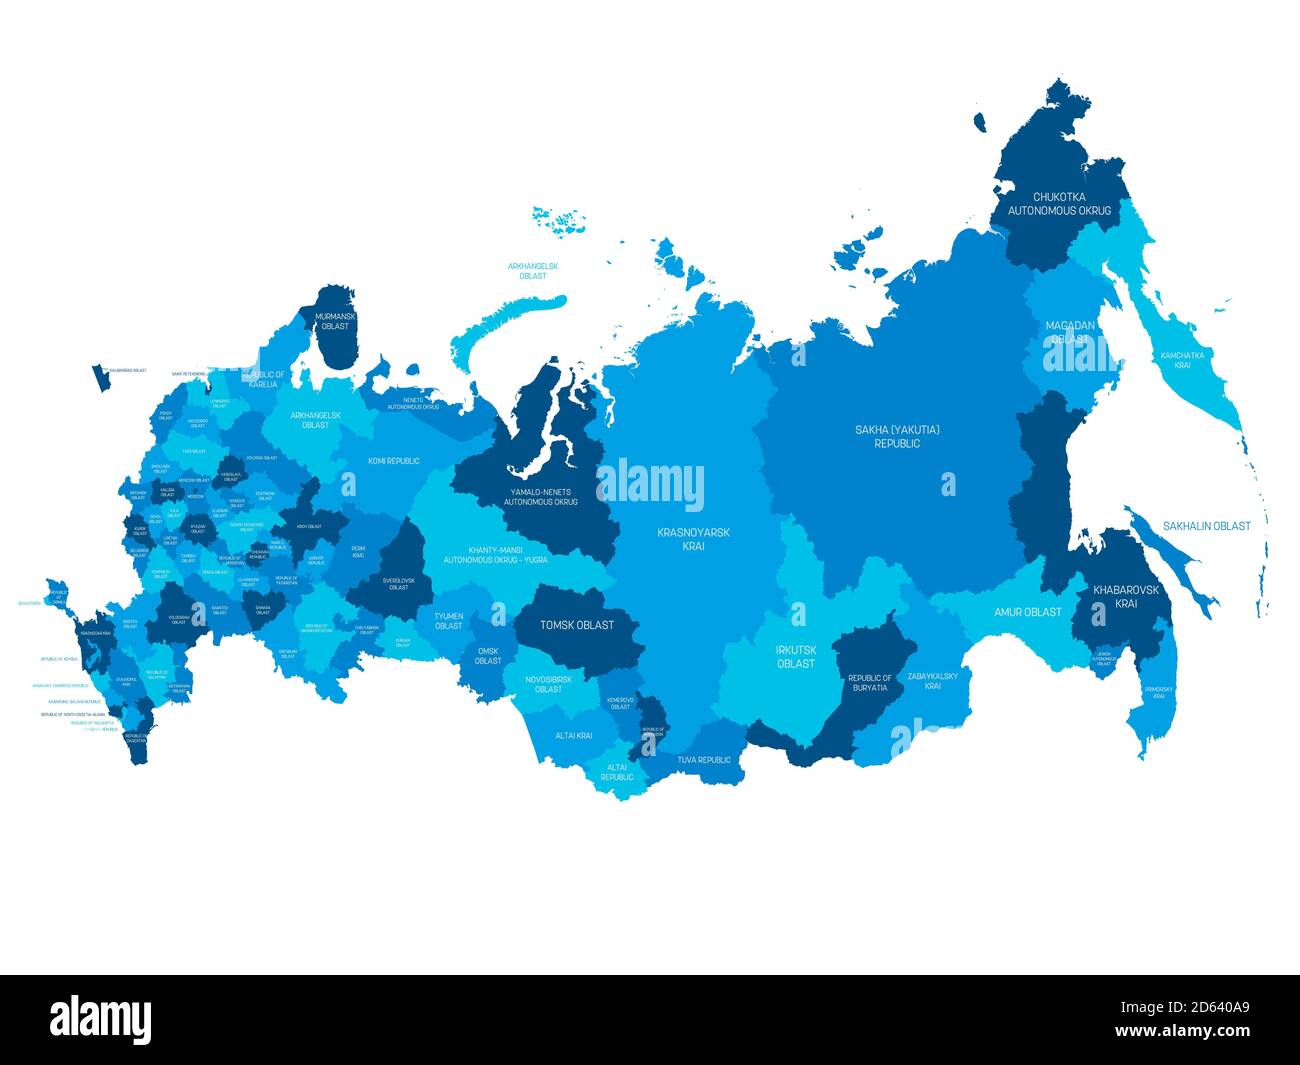 Blue political map of Russia, or Russian Federation. Federal subjects - republics, krays, oblasts, cities of federal significance, autonomous oblasts and autonomous okrugs. Simple flat vector map with labels. Stock Vector